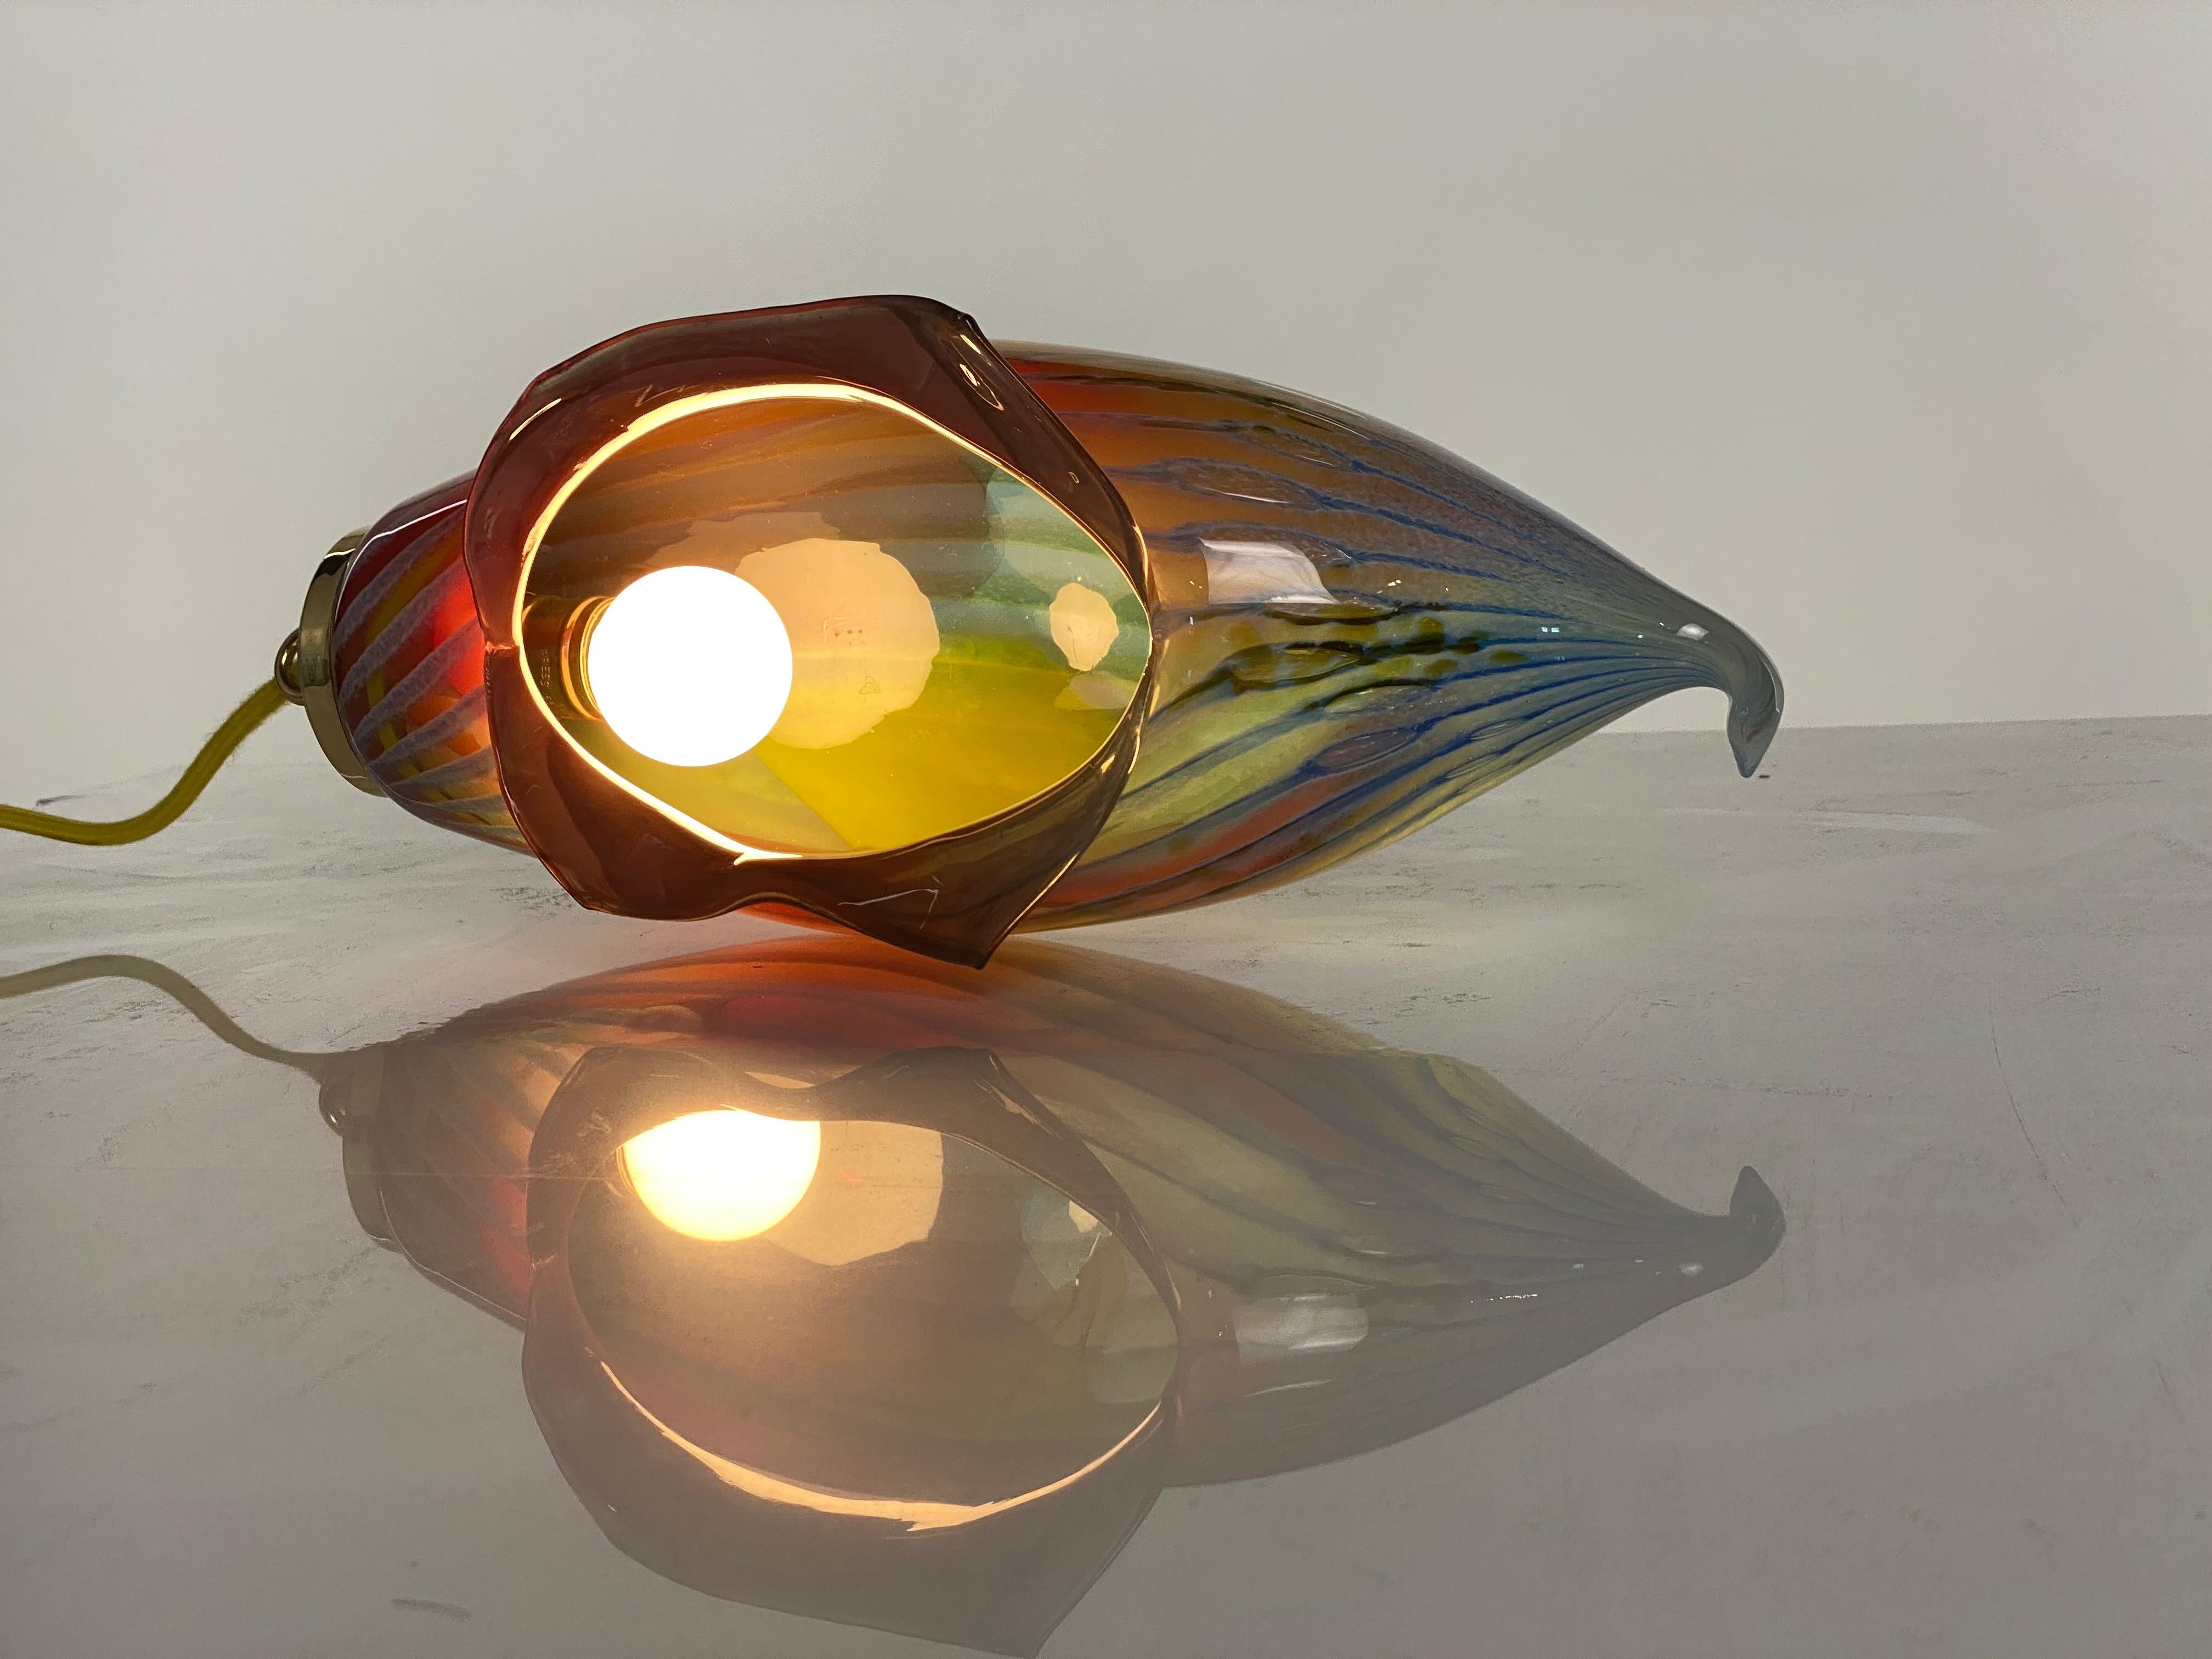 This is a new work by Mattia Biagi in a glass.
Sculptural lamp can be used as a table lamp or hang.